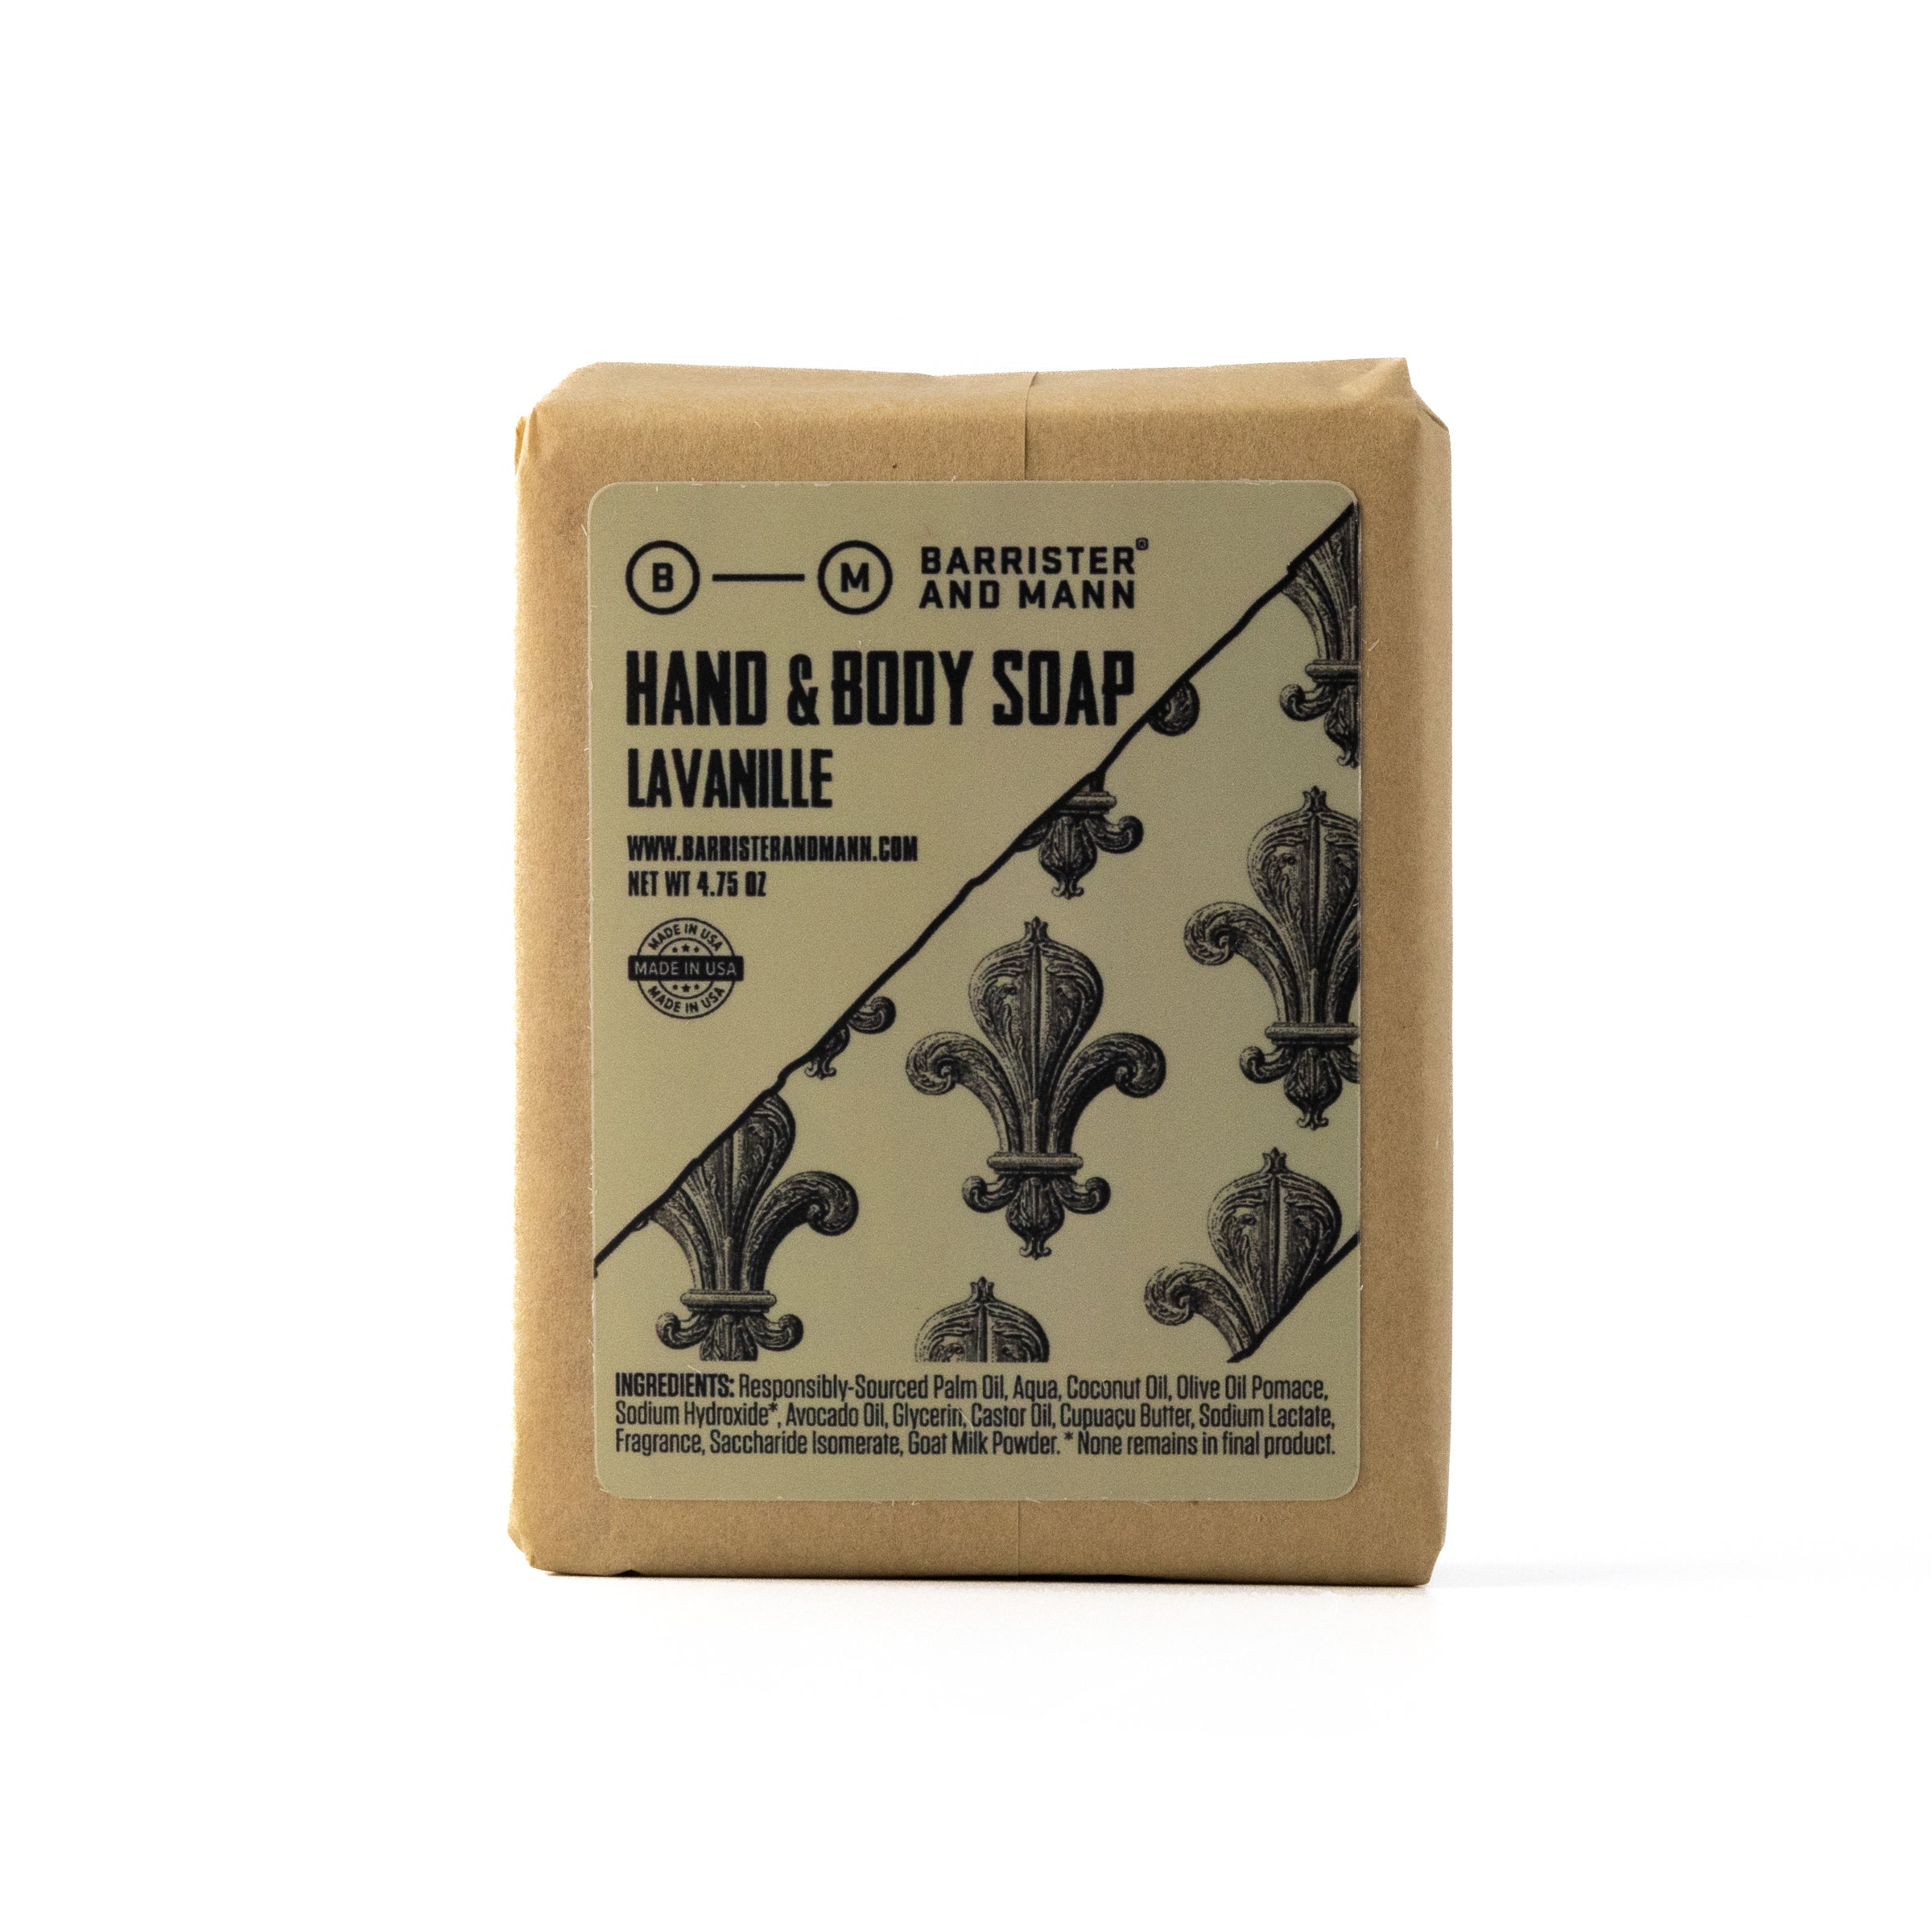 Hand & Body Soap: Lavanille - Barrister and Mann LLC